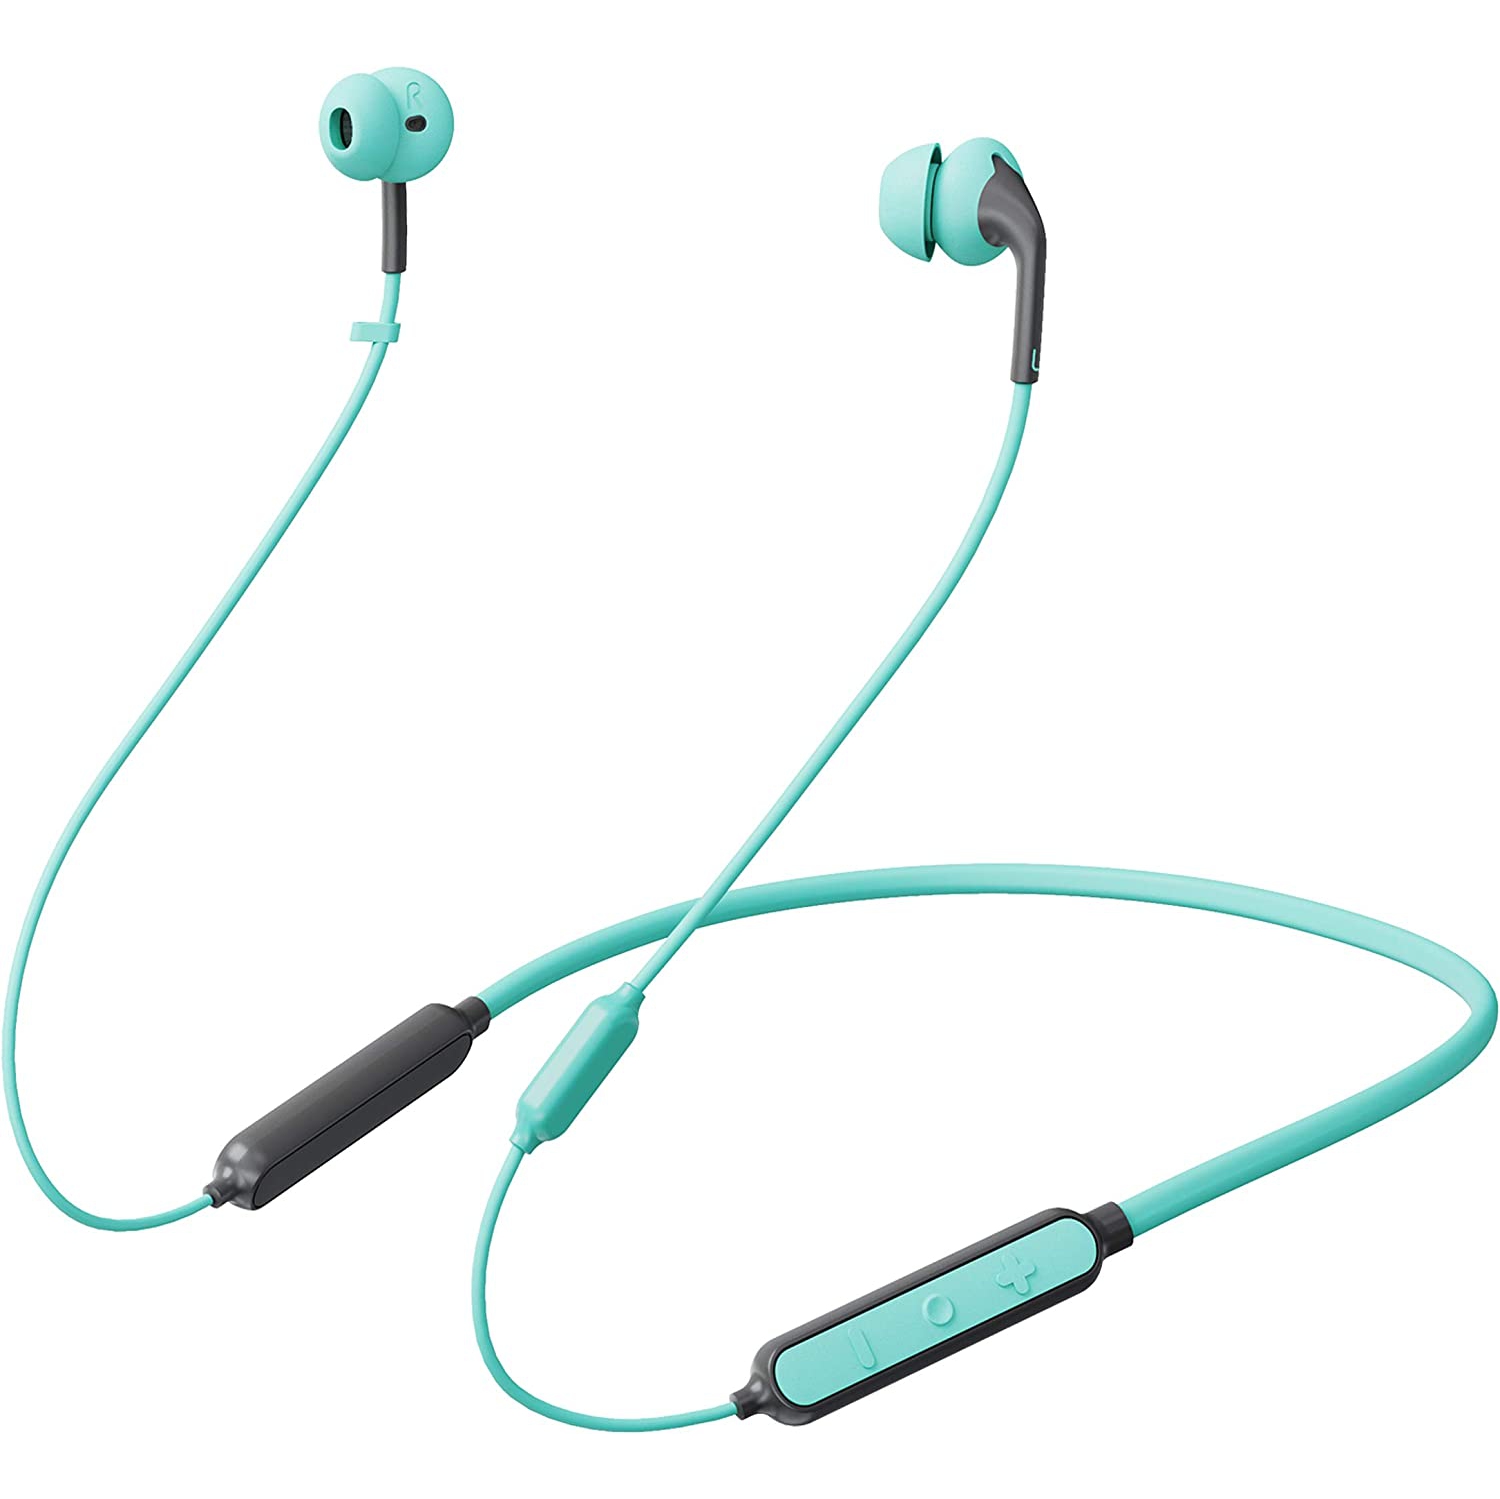 Dolaer Yamaha EP-E30A Blue Wireless Bluetooth Earbuds, Bluetooth 5.0 Earphone Connectivity, Siri/Google Assistant Compatible, Soft Neckband, USB A-C Charging 14h Max Playback (Appr